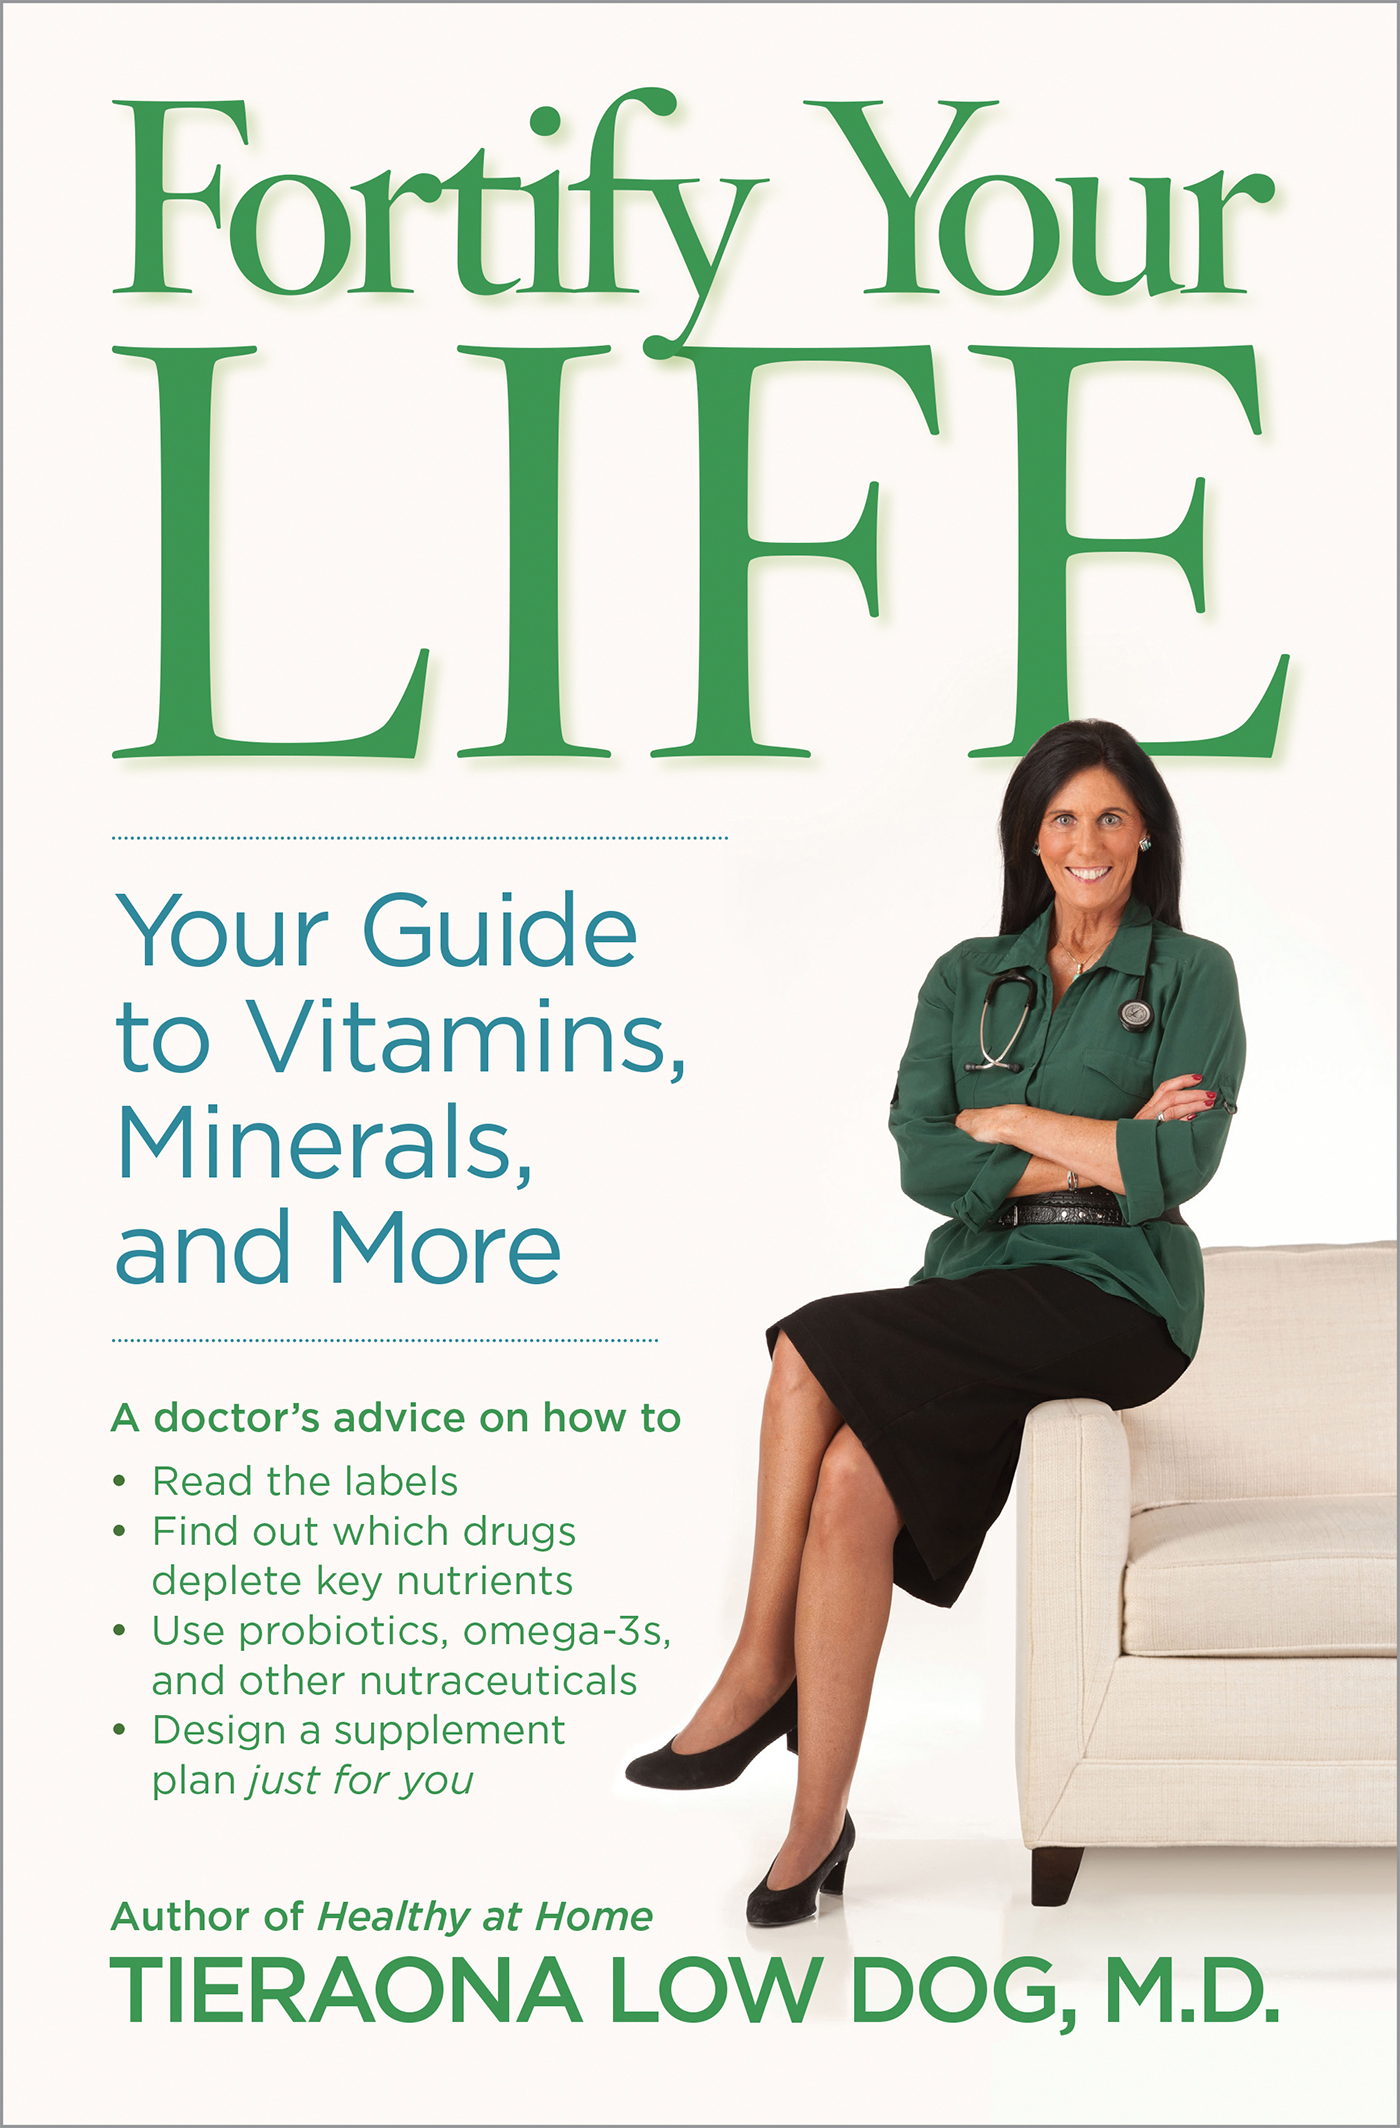 Fortify your life your guide to vitamins, minerals, and more cover image